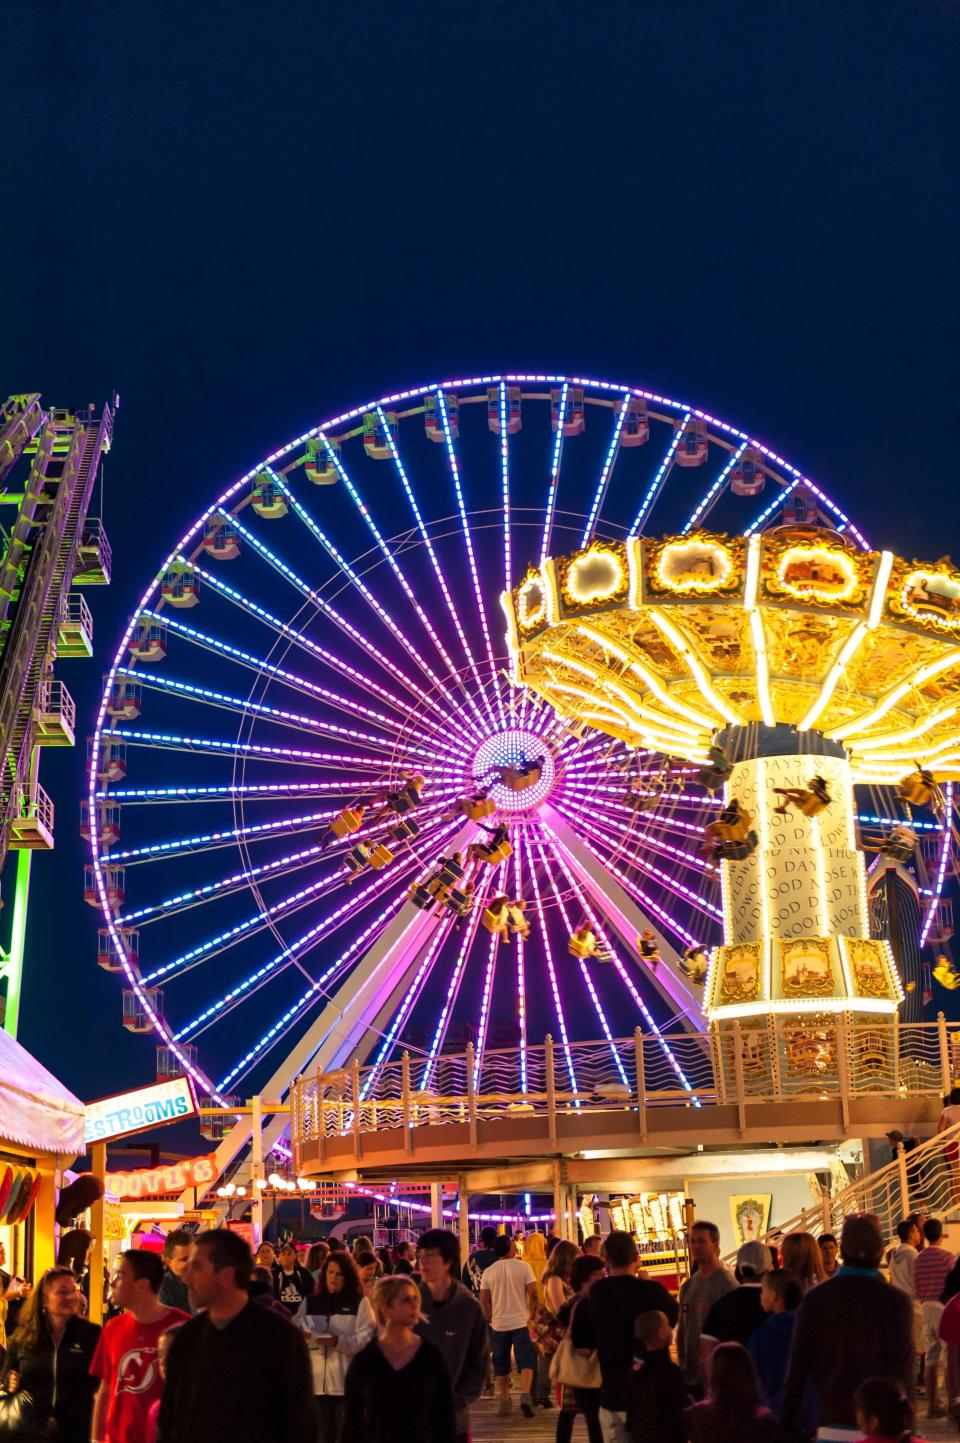 The Ferris wheel at Morey's Piers in Wildwood is illuminated by 92,400 lights.